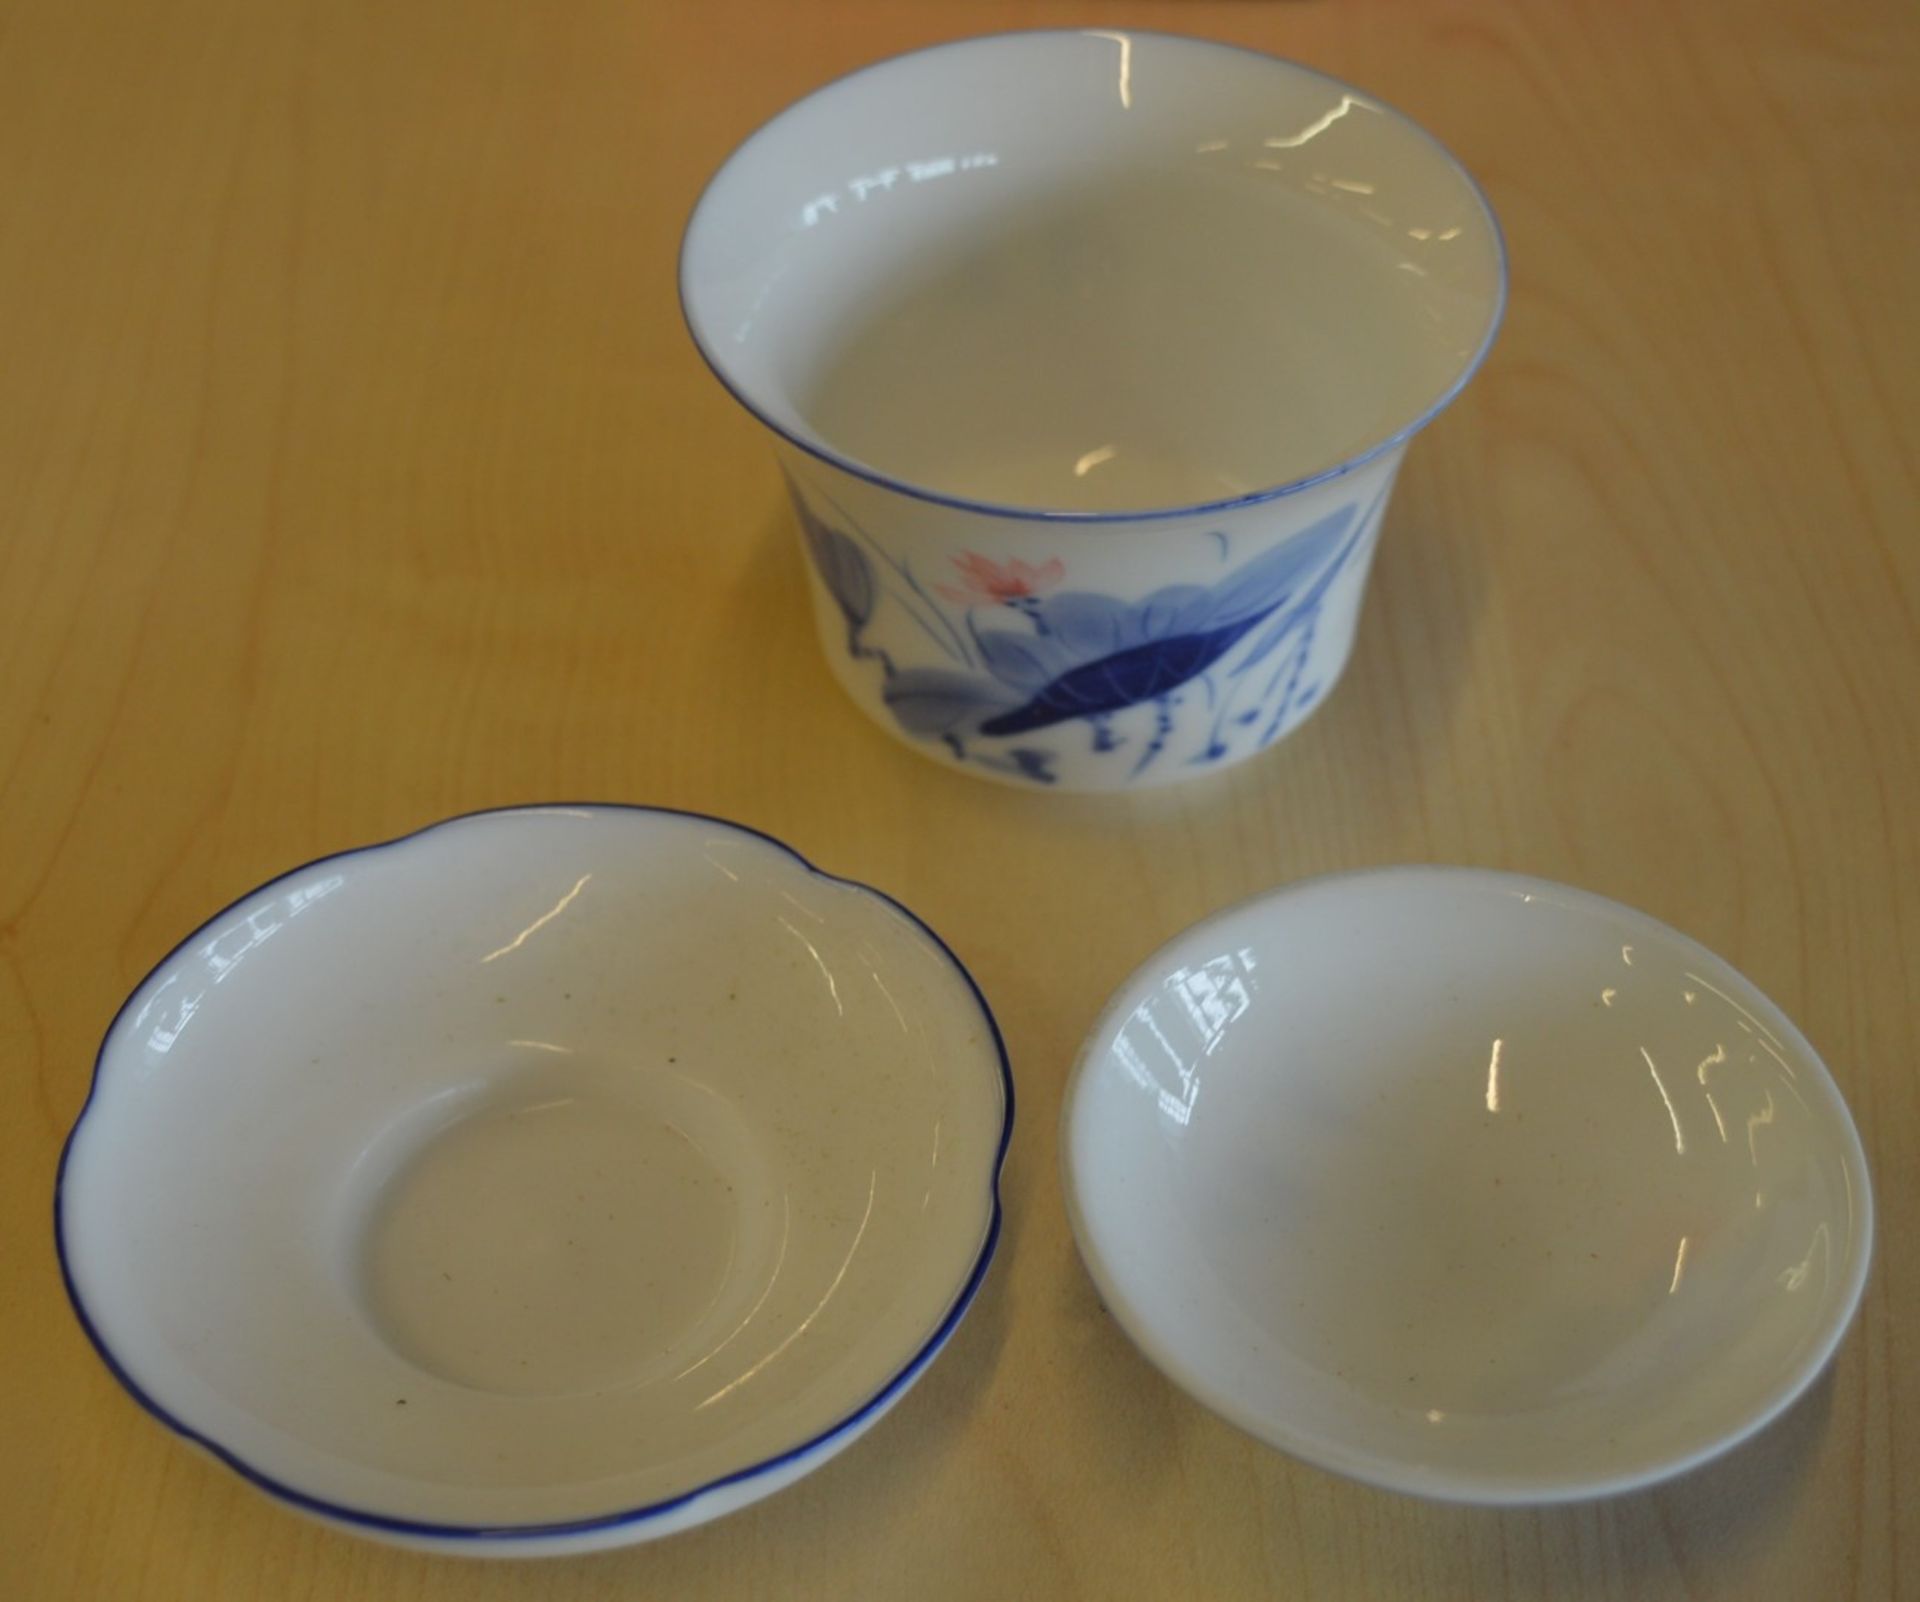 20 x Oriental Cups With Saucers and Lids - Elegant Porcelain Cups / Pots With Fitted Lid and - Image 4 of 6